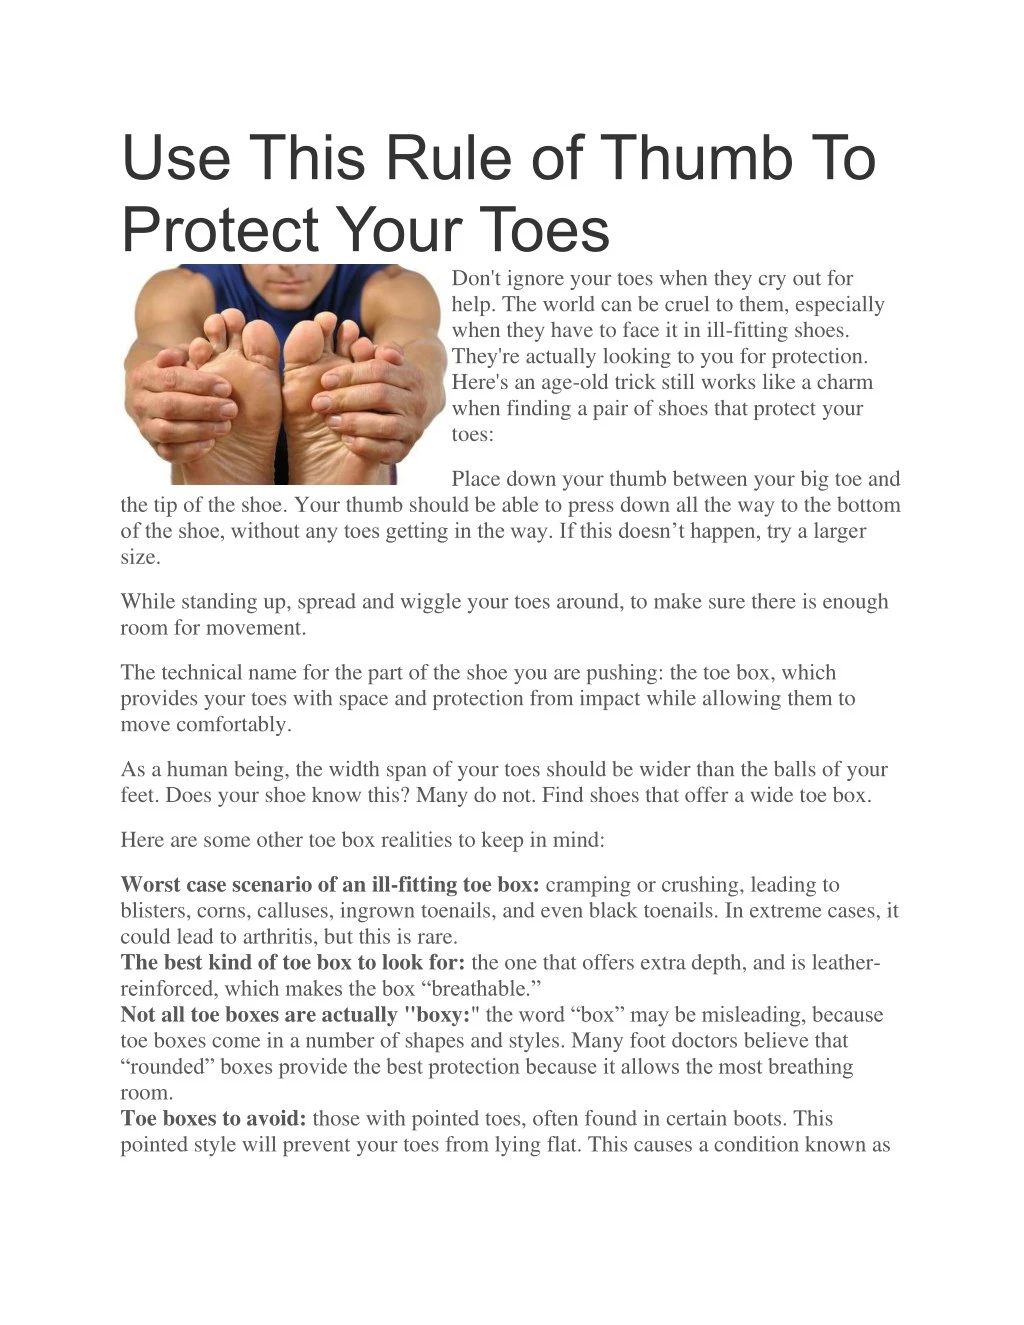 use this rule of thumb to protect your toes